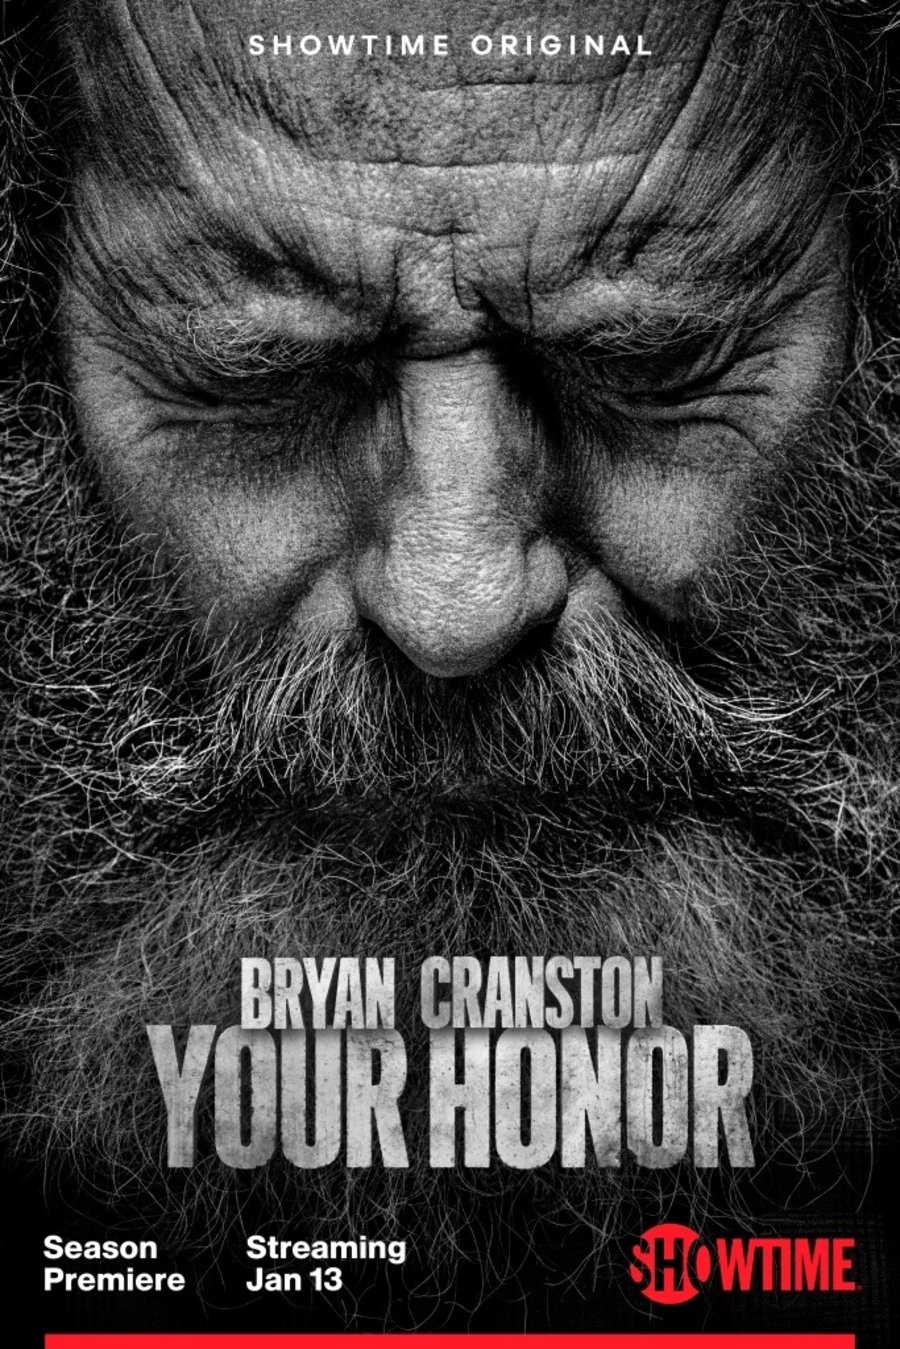 5809 on january 13 the second season of the crime drama your honor starring bryan cranston prem